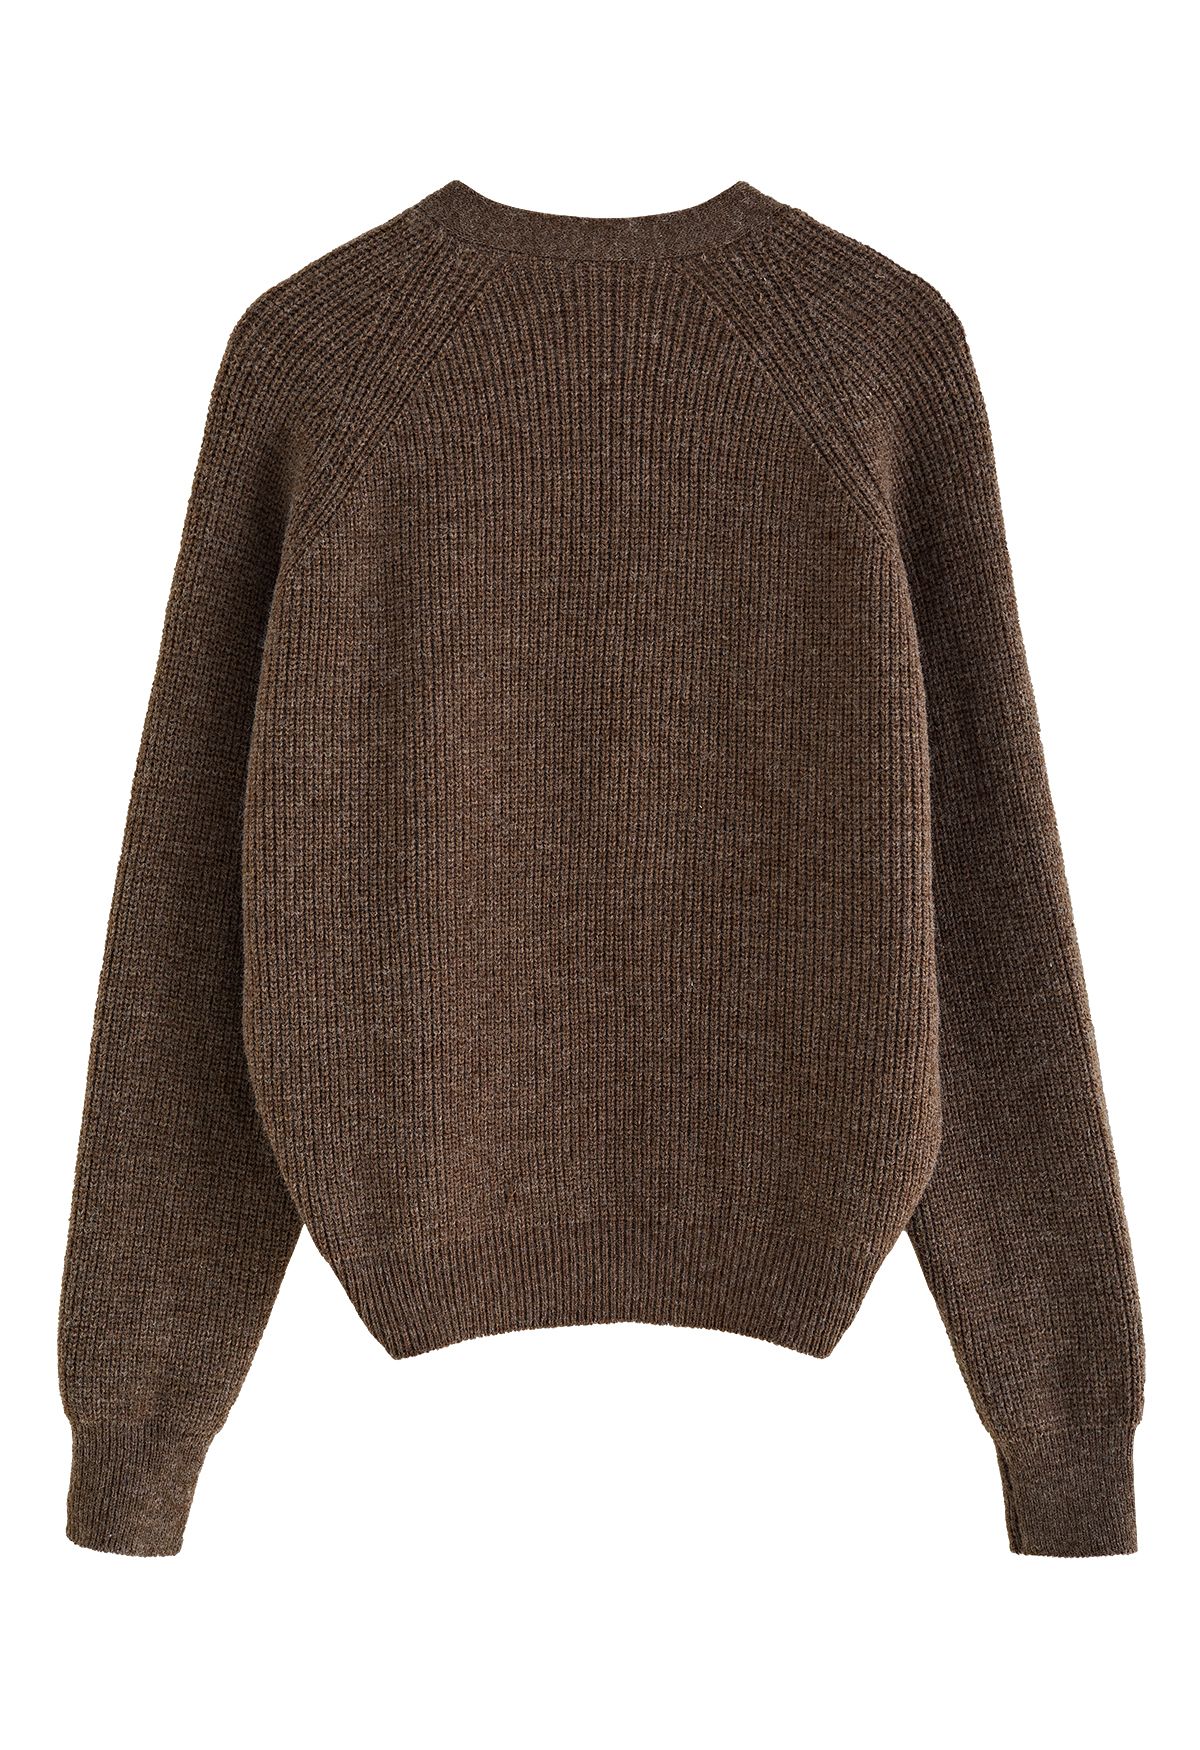 Twist Front Solid Color Sweater in Brown